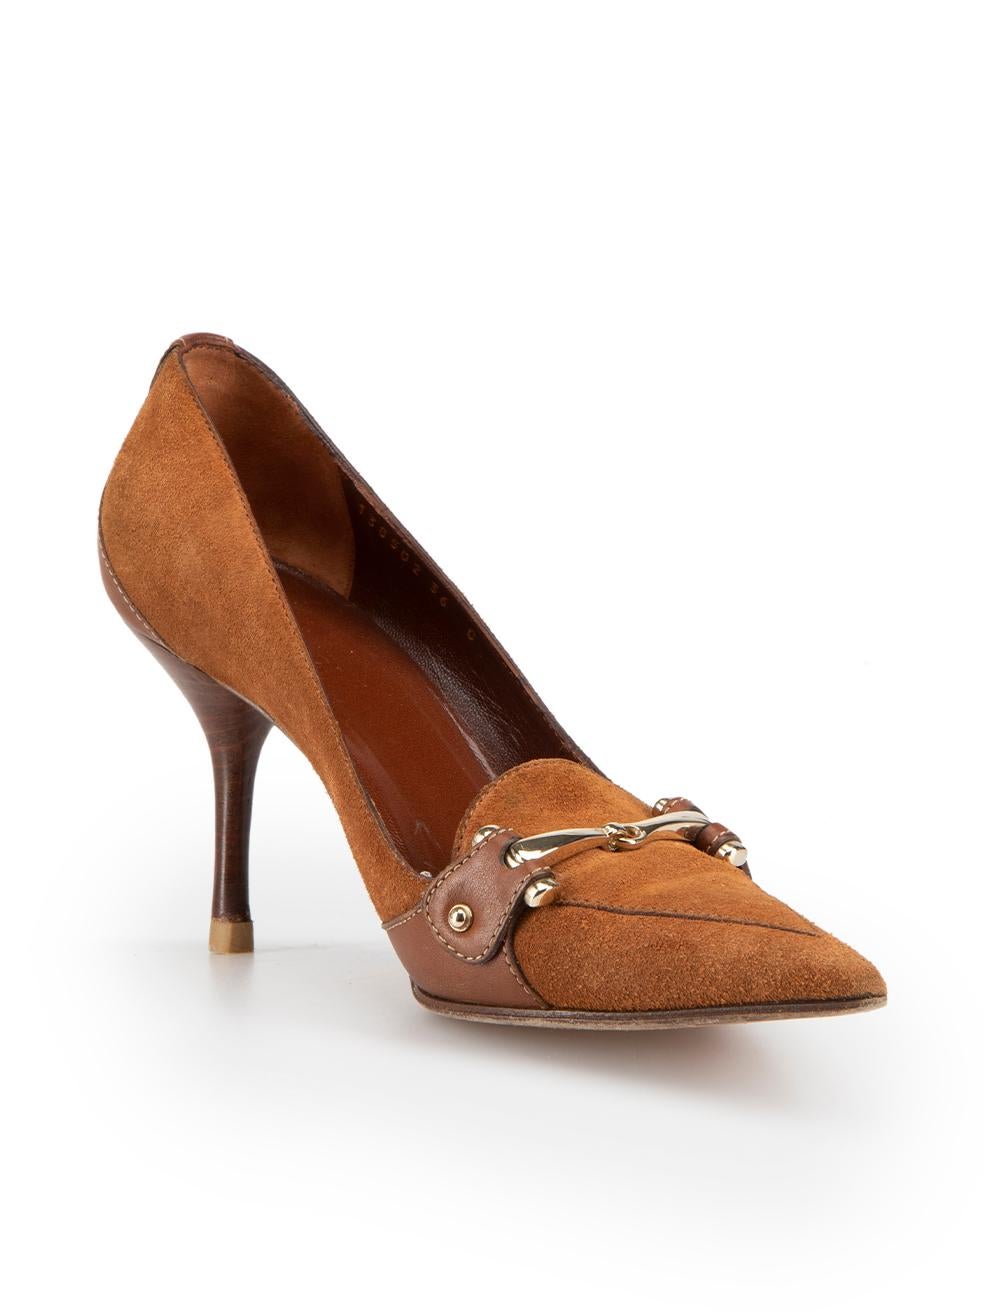 CONDITION is Very good. Minimal wear to shoes is evident. Minimal wear to the heel-stems with small scuffs on this used Gucci designer resale item. These shoes come with original dust bag.



Details


Brown

Suede

Slip on pumps

Pointed toe

High